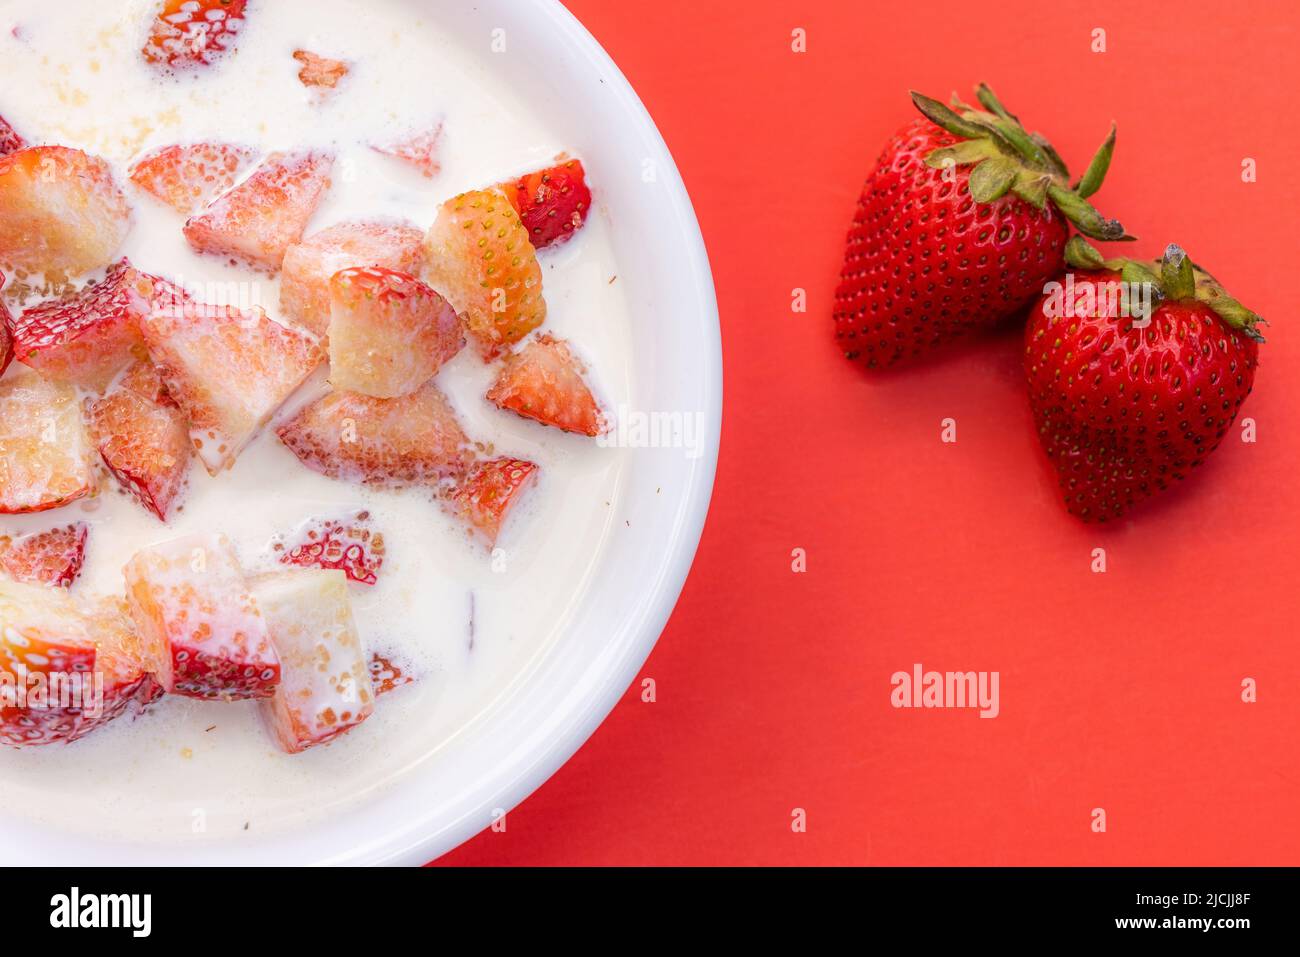 Fresh strawberries with heavy cream and a sprinkle of sugar on a red background Stock Photo